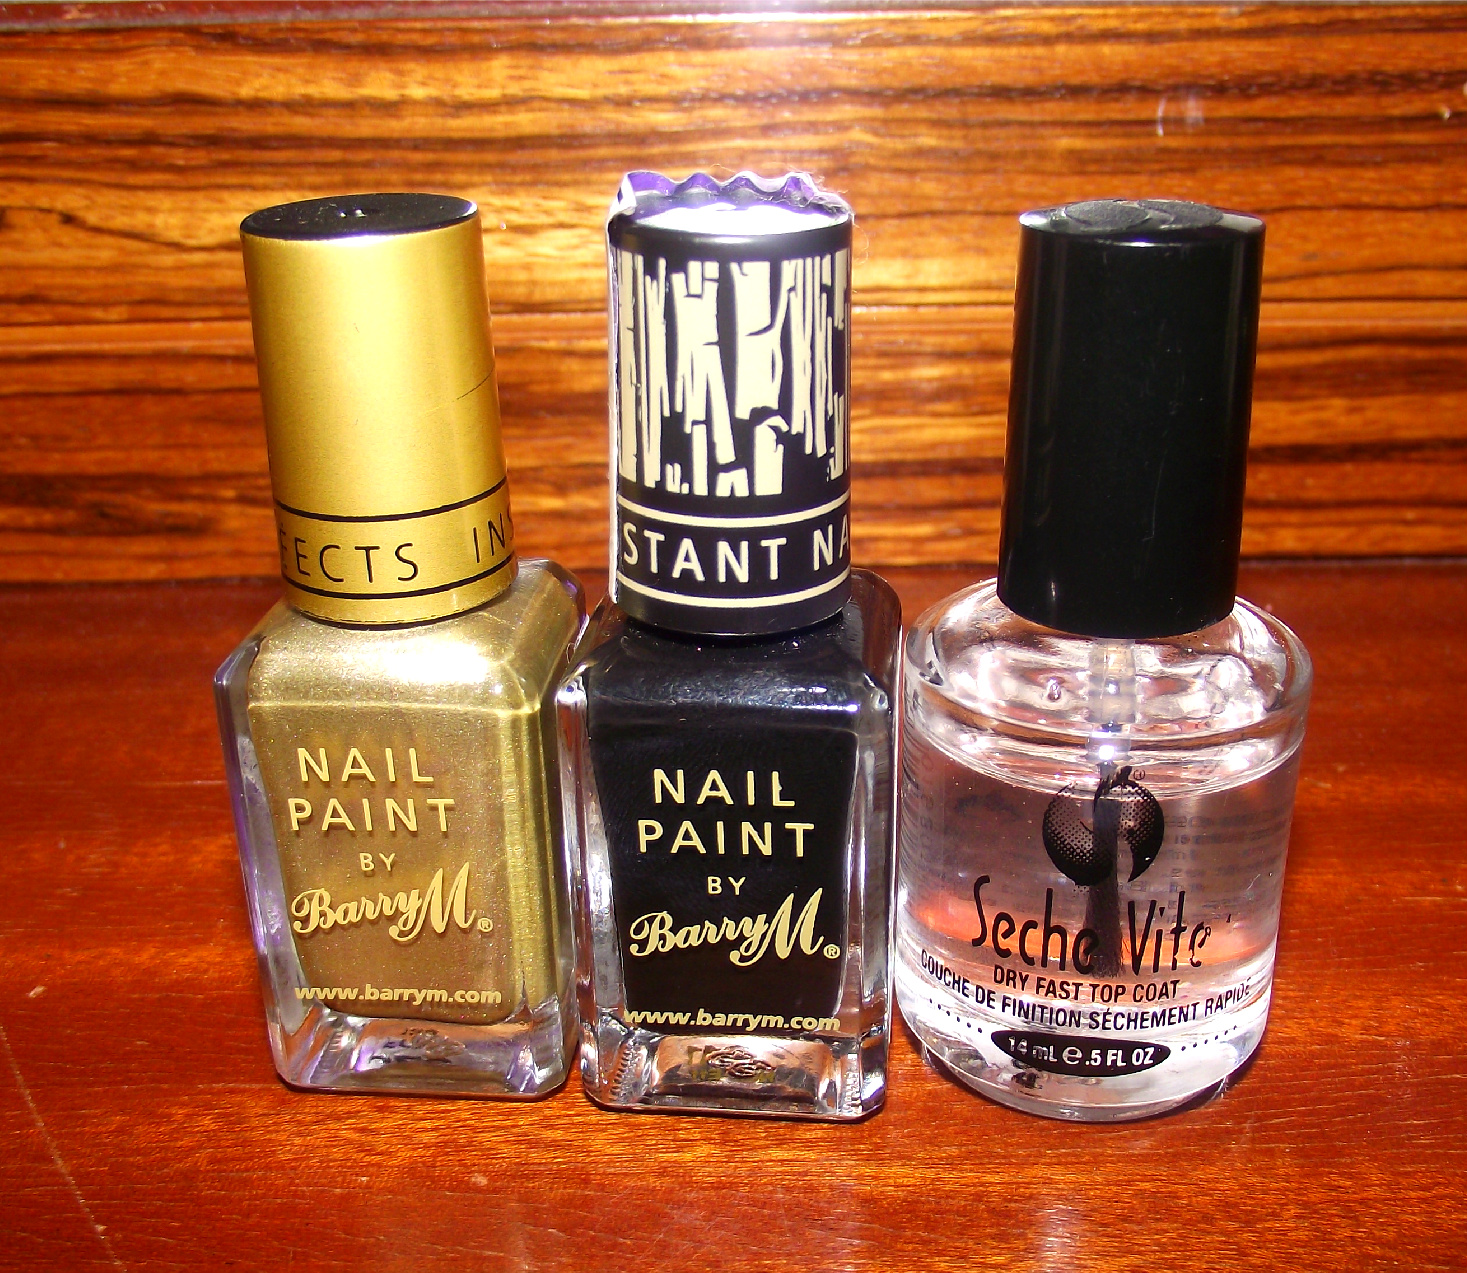 I used one coat of the Barry M Instant Nail Effects foil varnish in